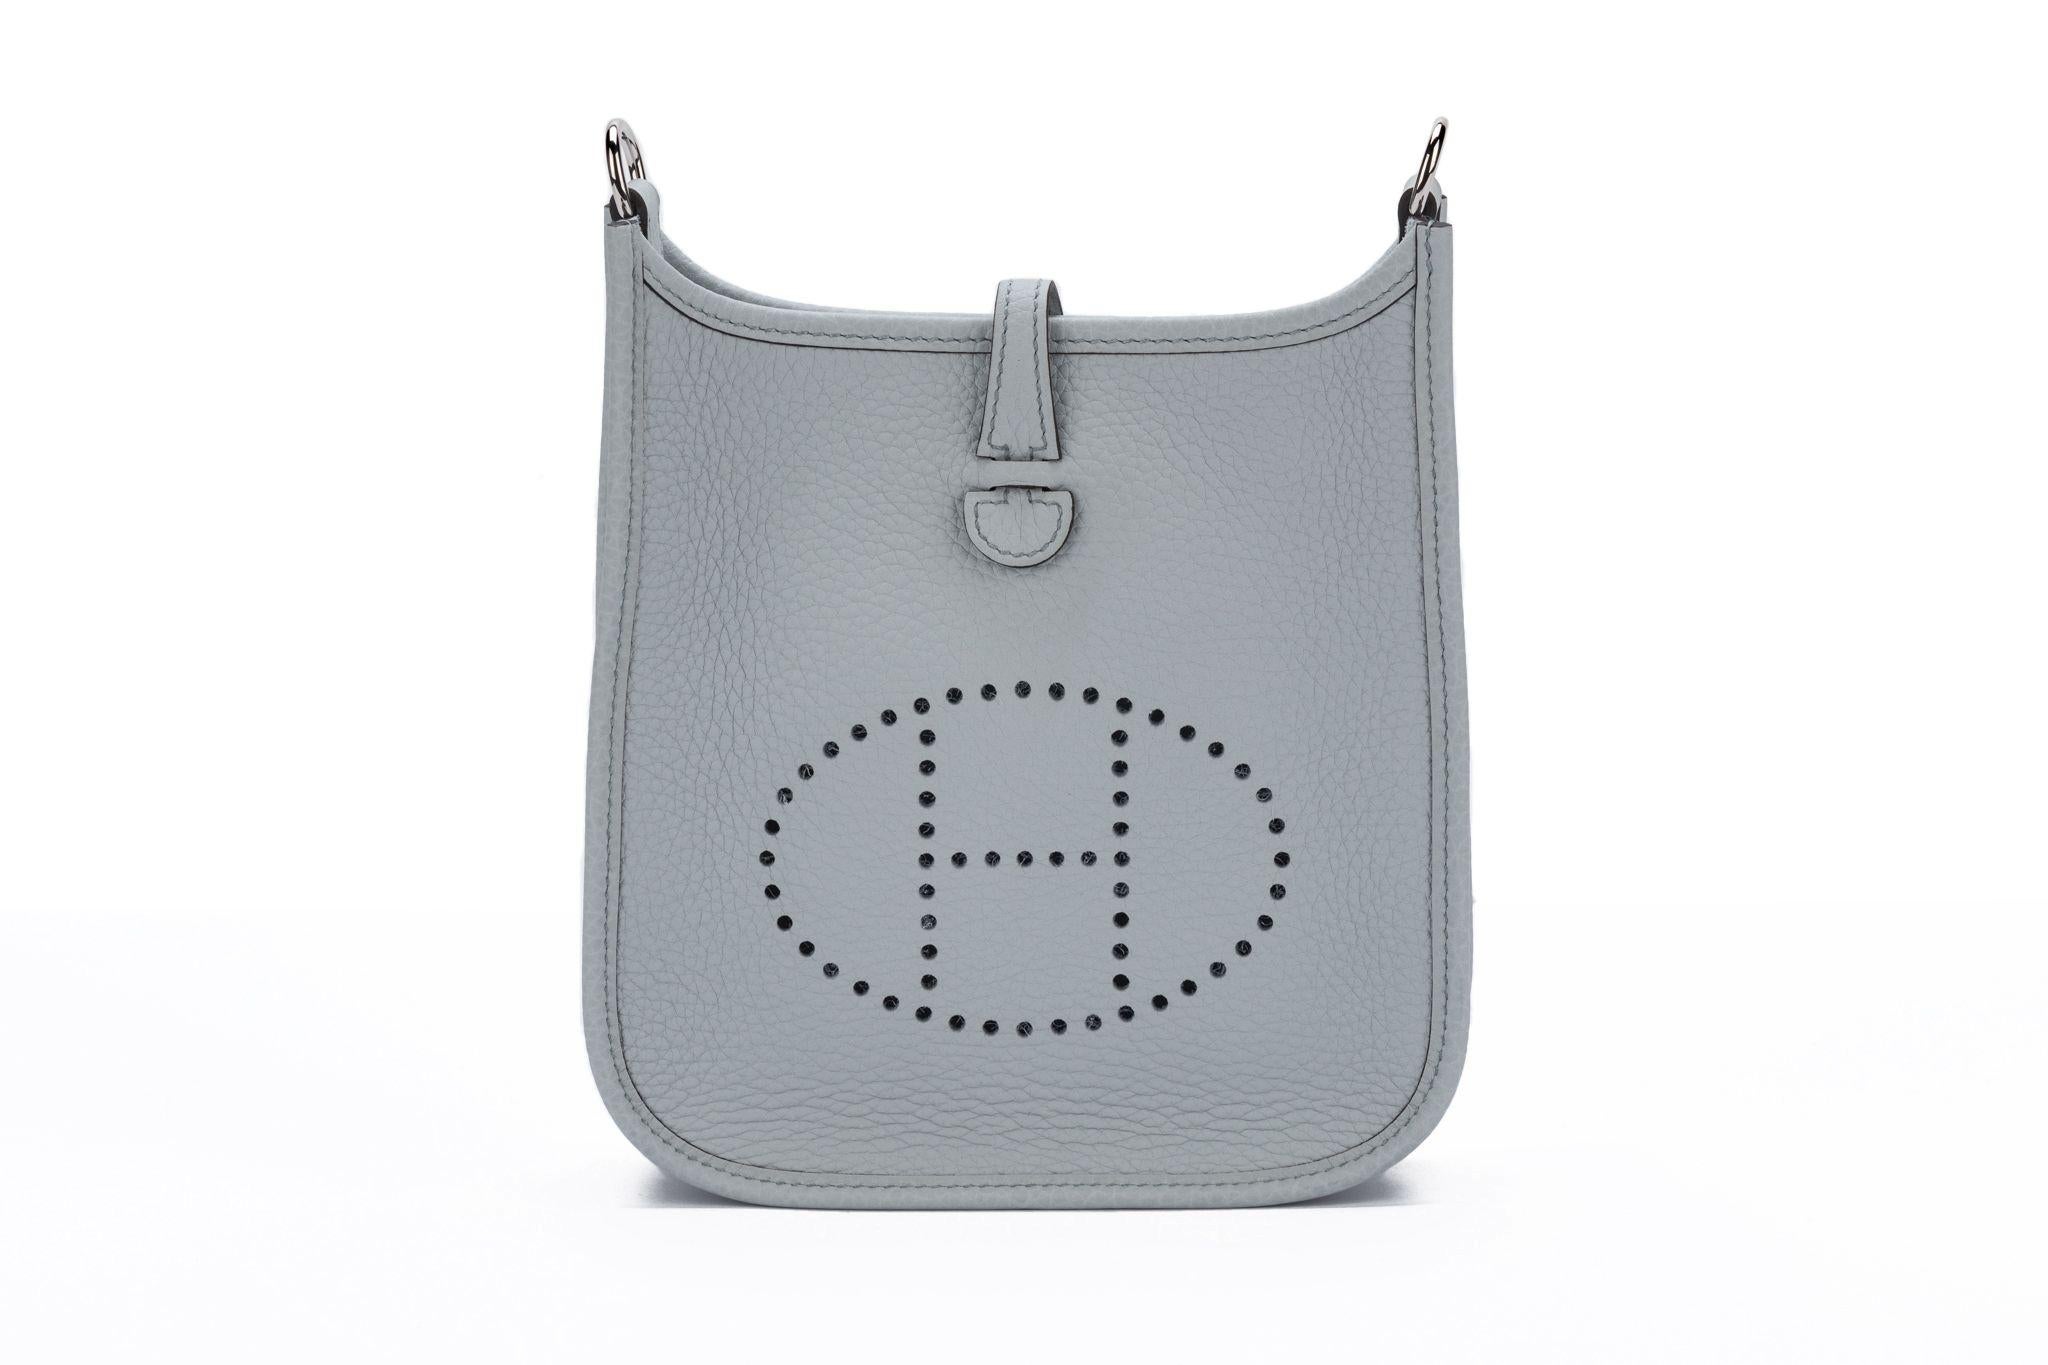 Hermès Gris Perle Clemence Evelyne TPM In New Condition For Sale In West Hollywood, CA